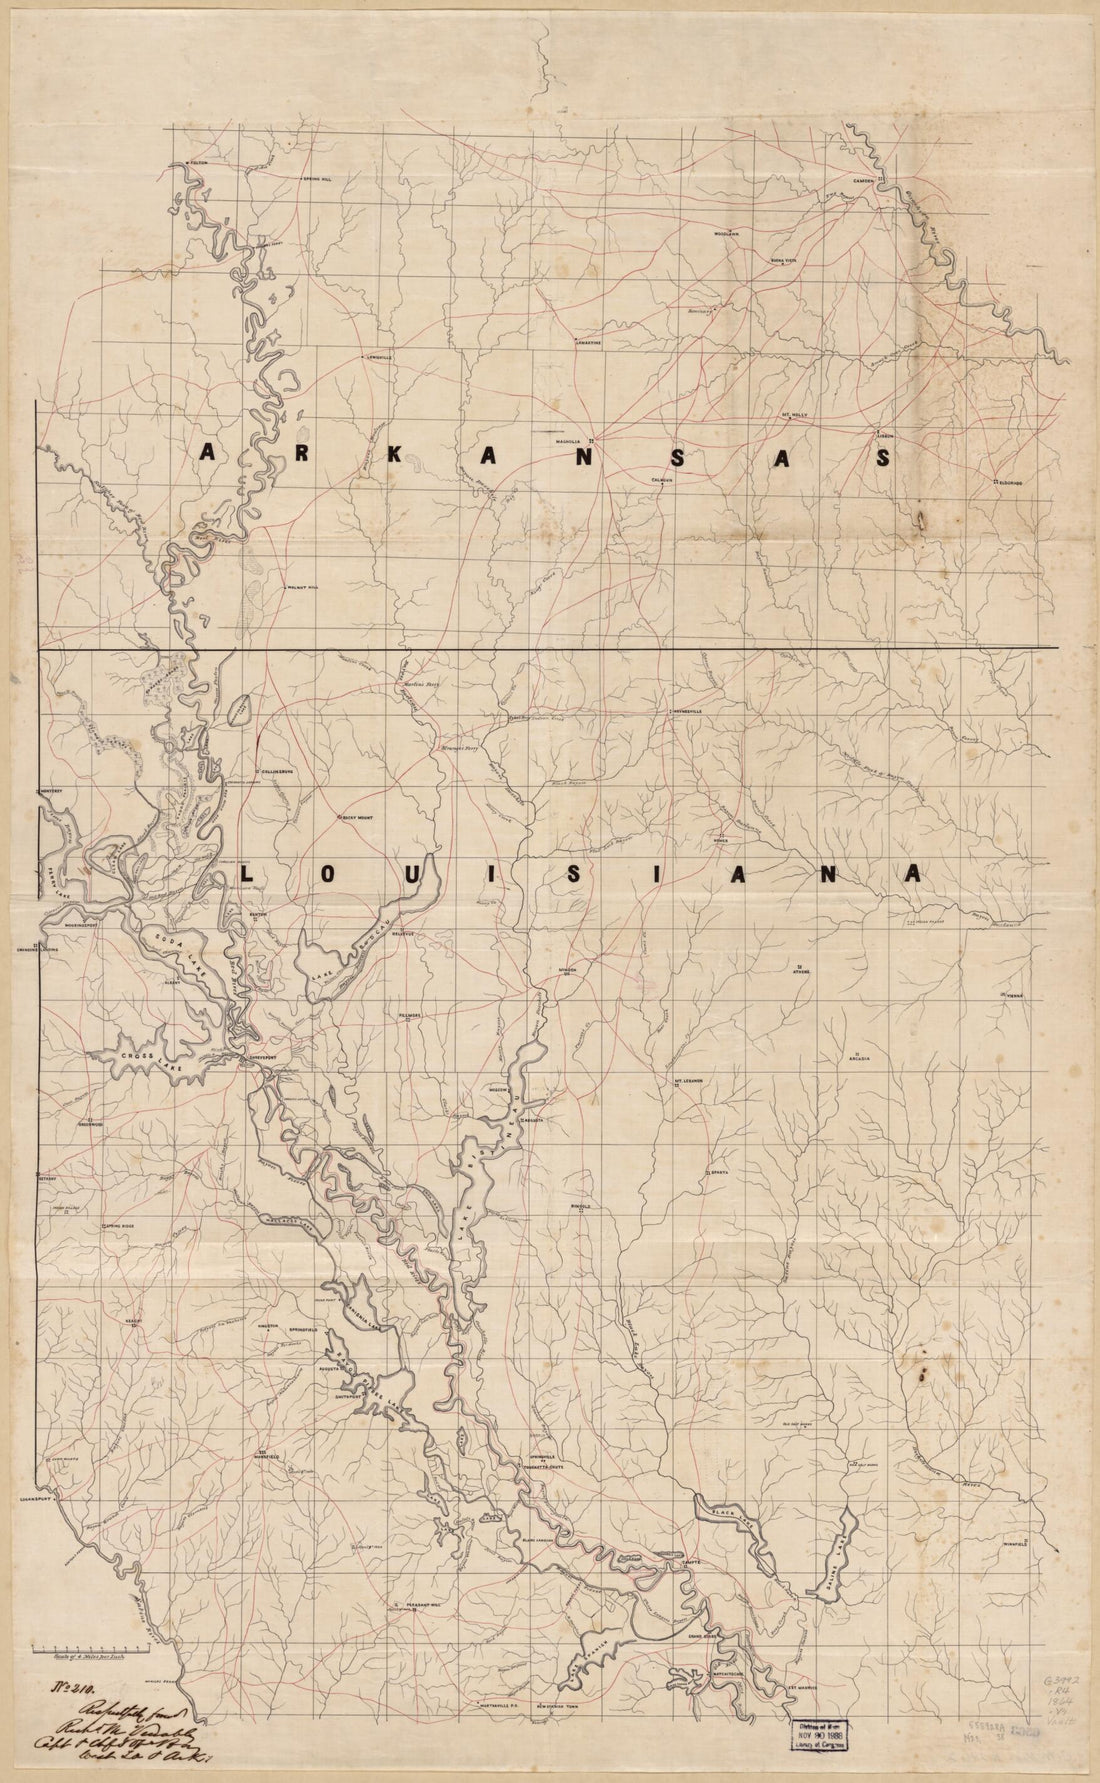 This old map of May 22. from 1864 was created by Richard M. (Richard Morton) Venable in 1864